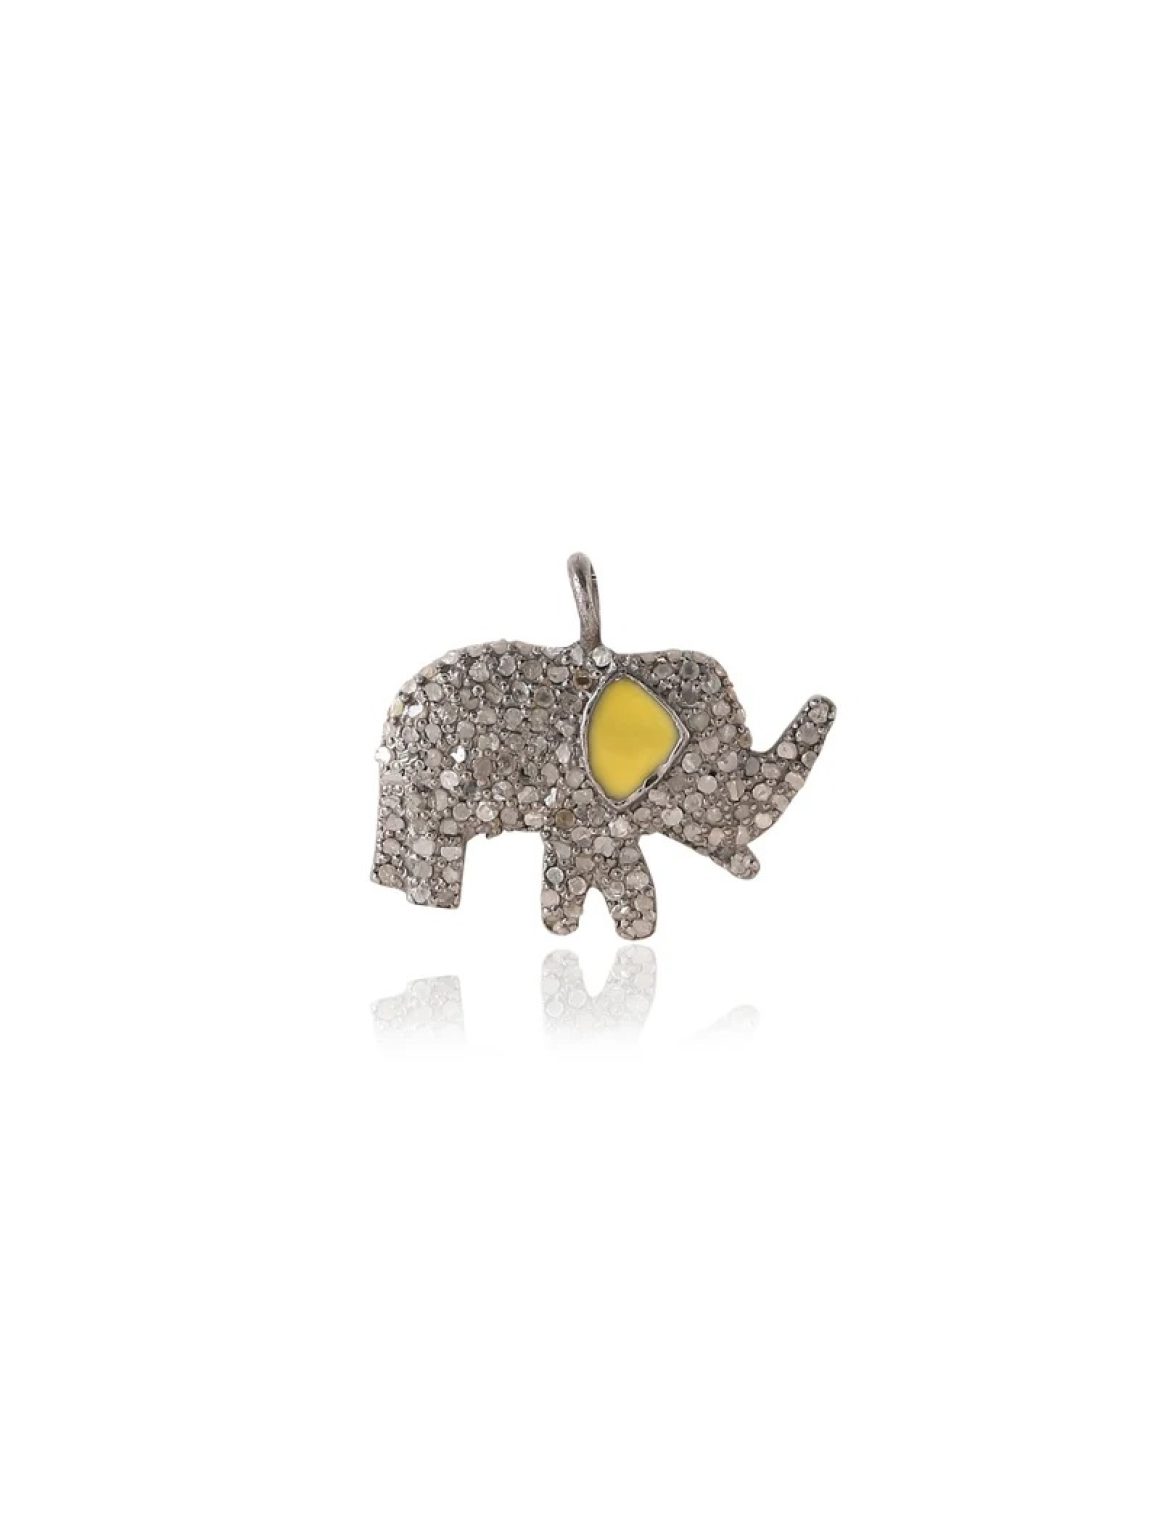 Pave Diamond Elephant charm for necklace in sterling silver 925. Minimalist elephant charm for bracelet / earring. Cute animal charm.